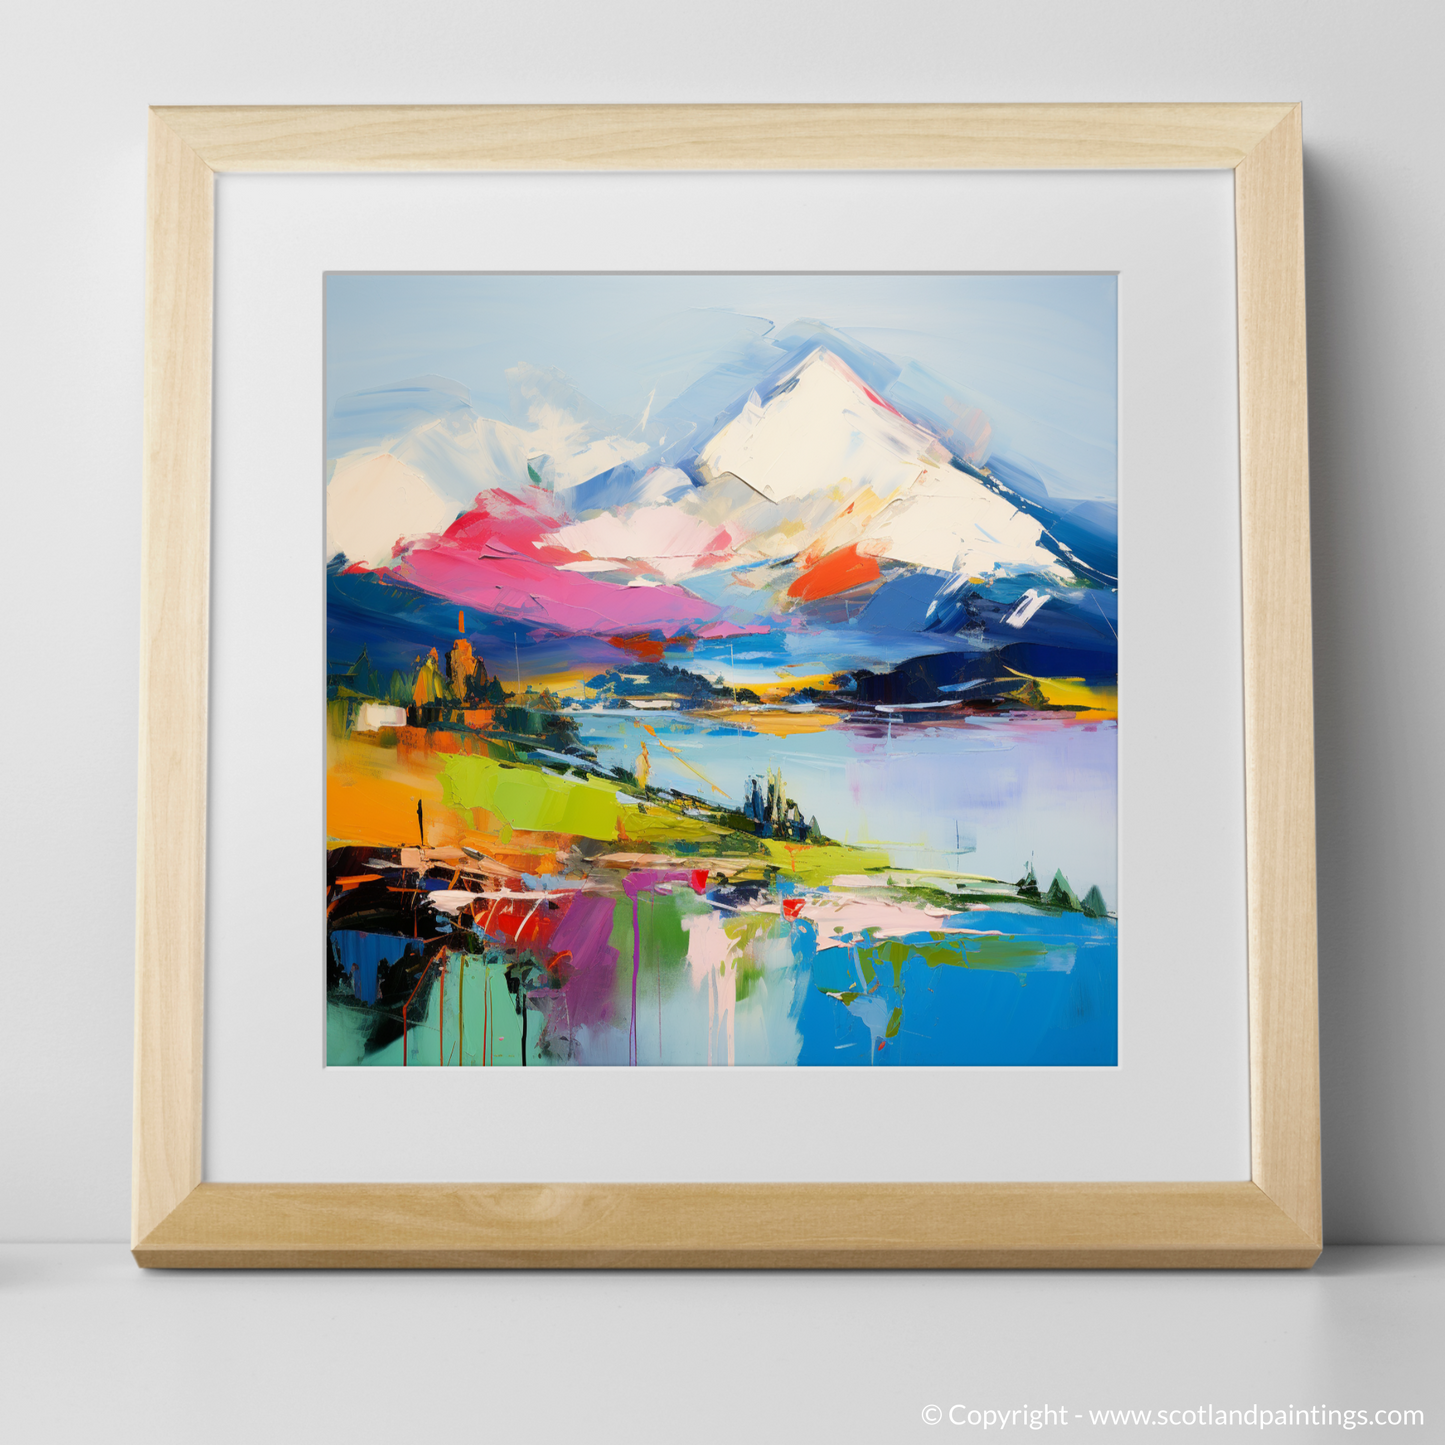 Art Print of Snow-capped peaks overlooking Loch Lomond with a natural frame